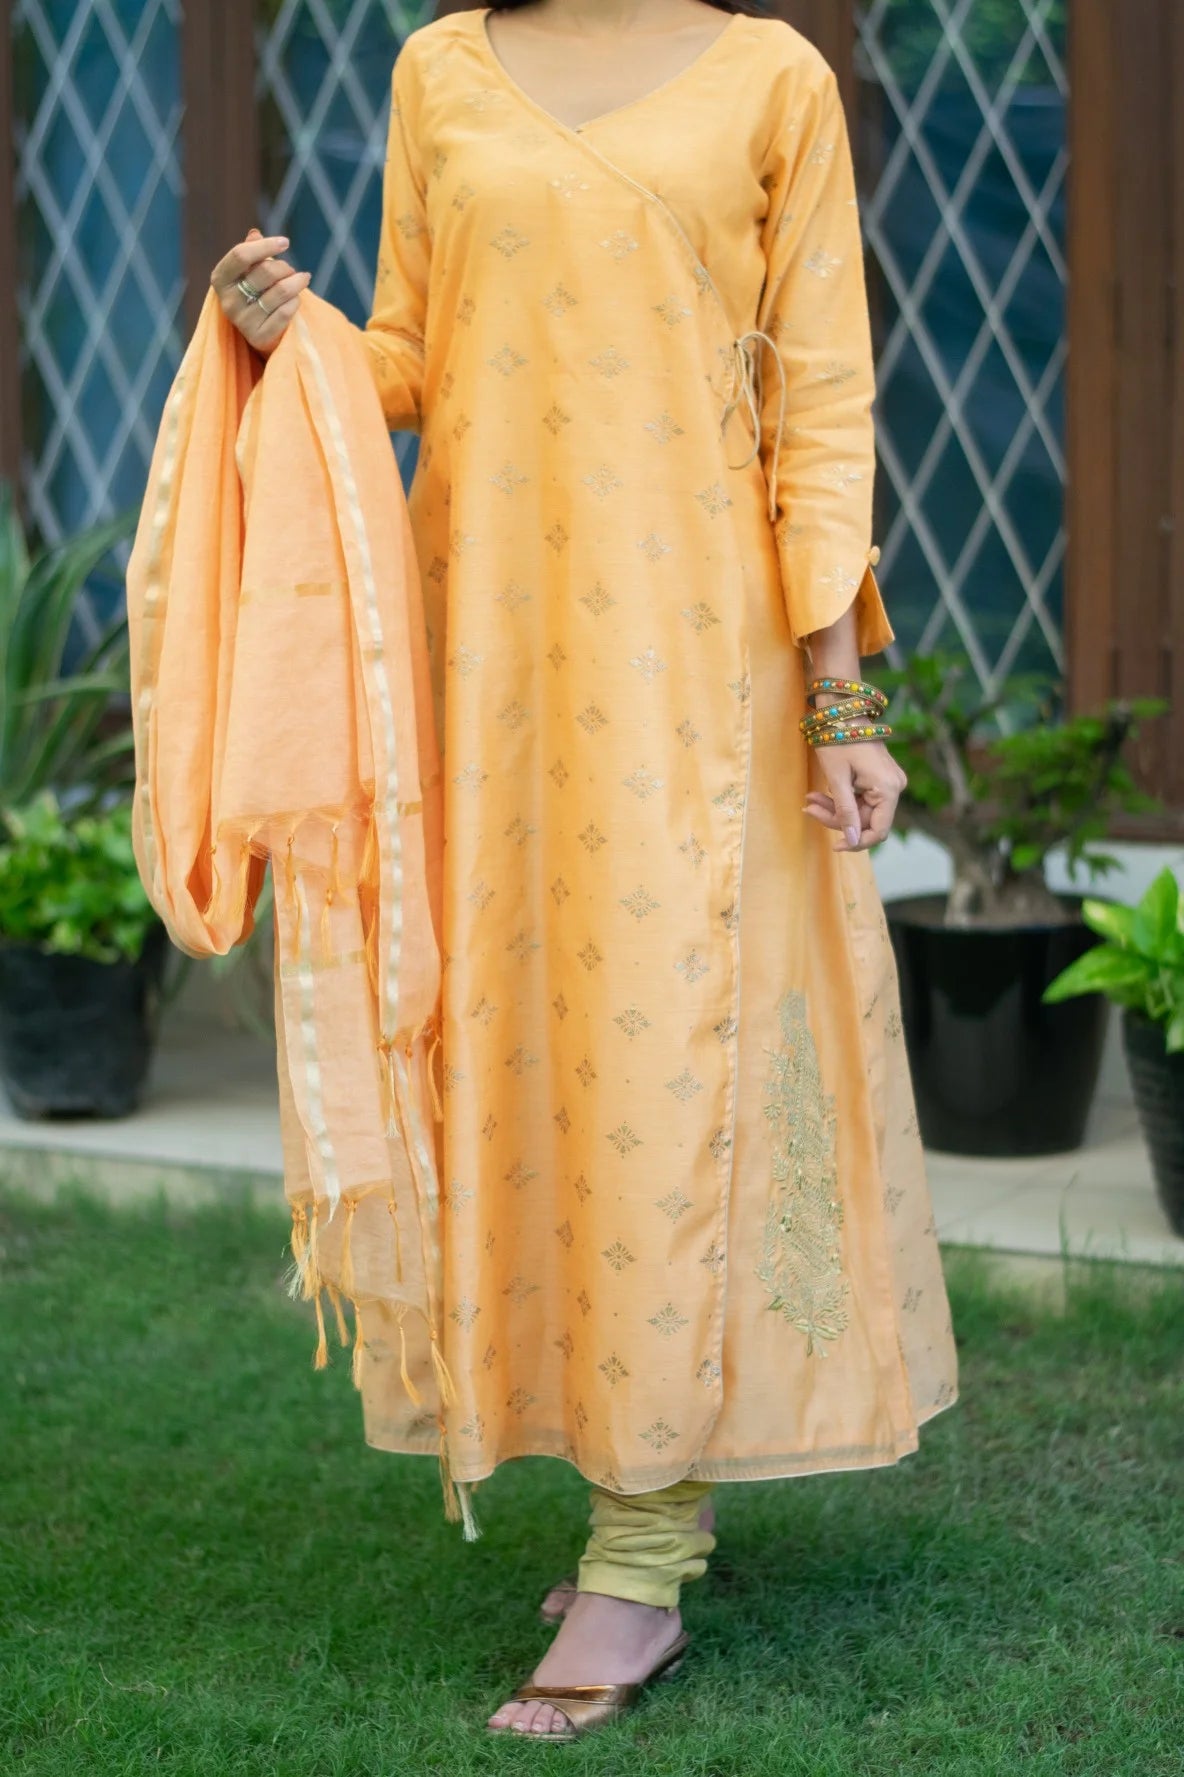 A lovely peach angarkha kurta, adorned with intricate embroidery, as worn by a graceful Indian woman.